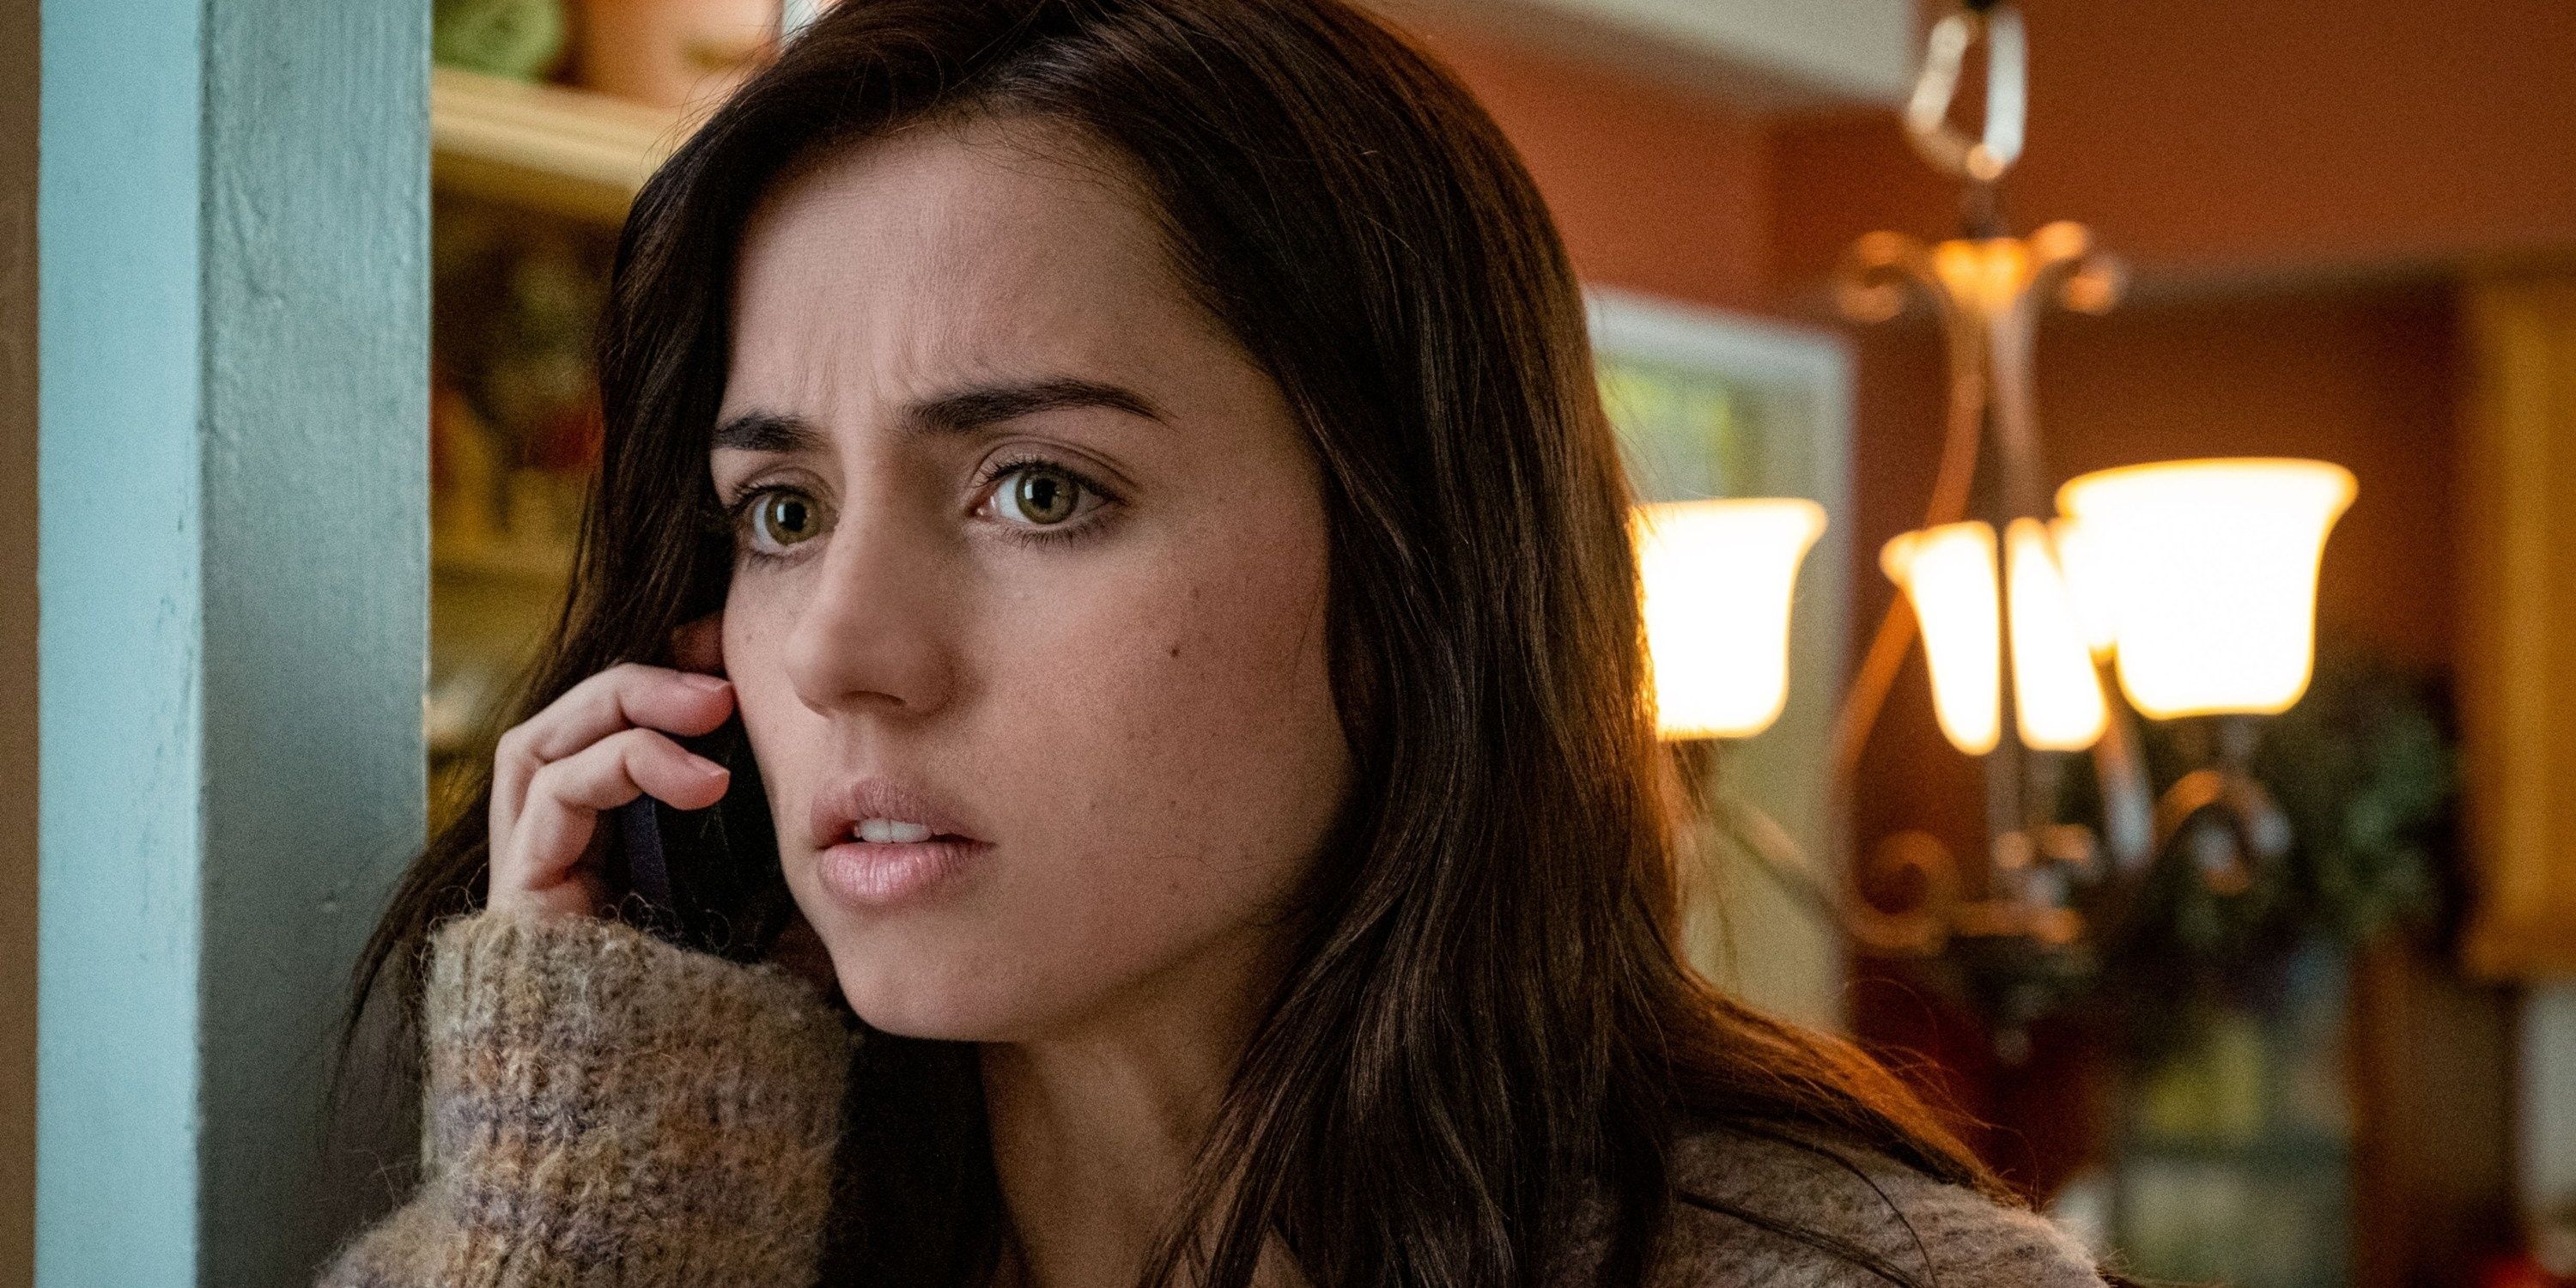 Ana de Armas on the phone looking concerned in Knives Out